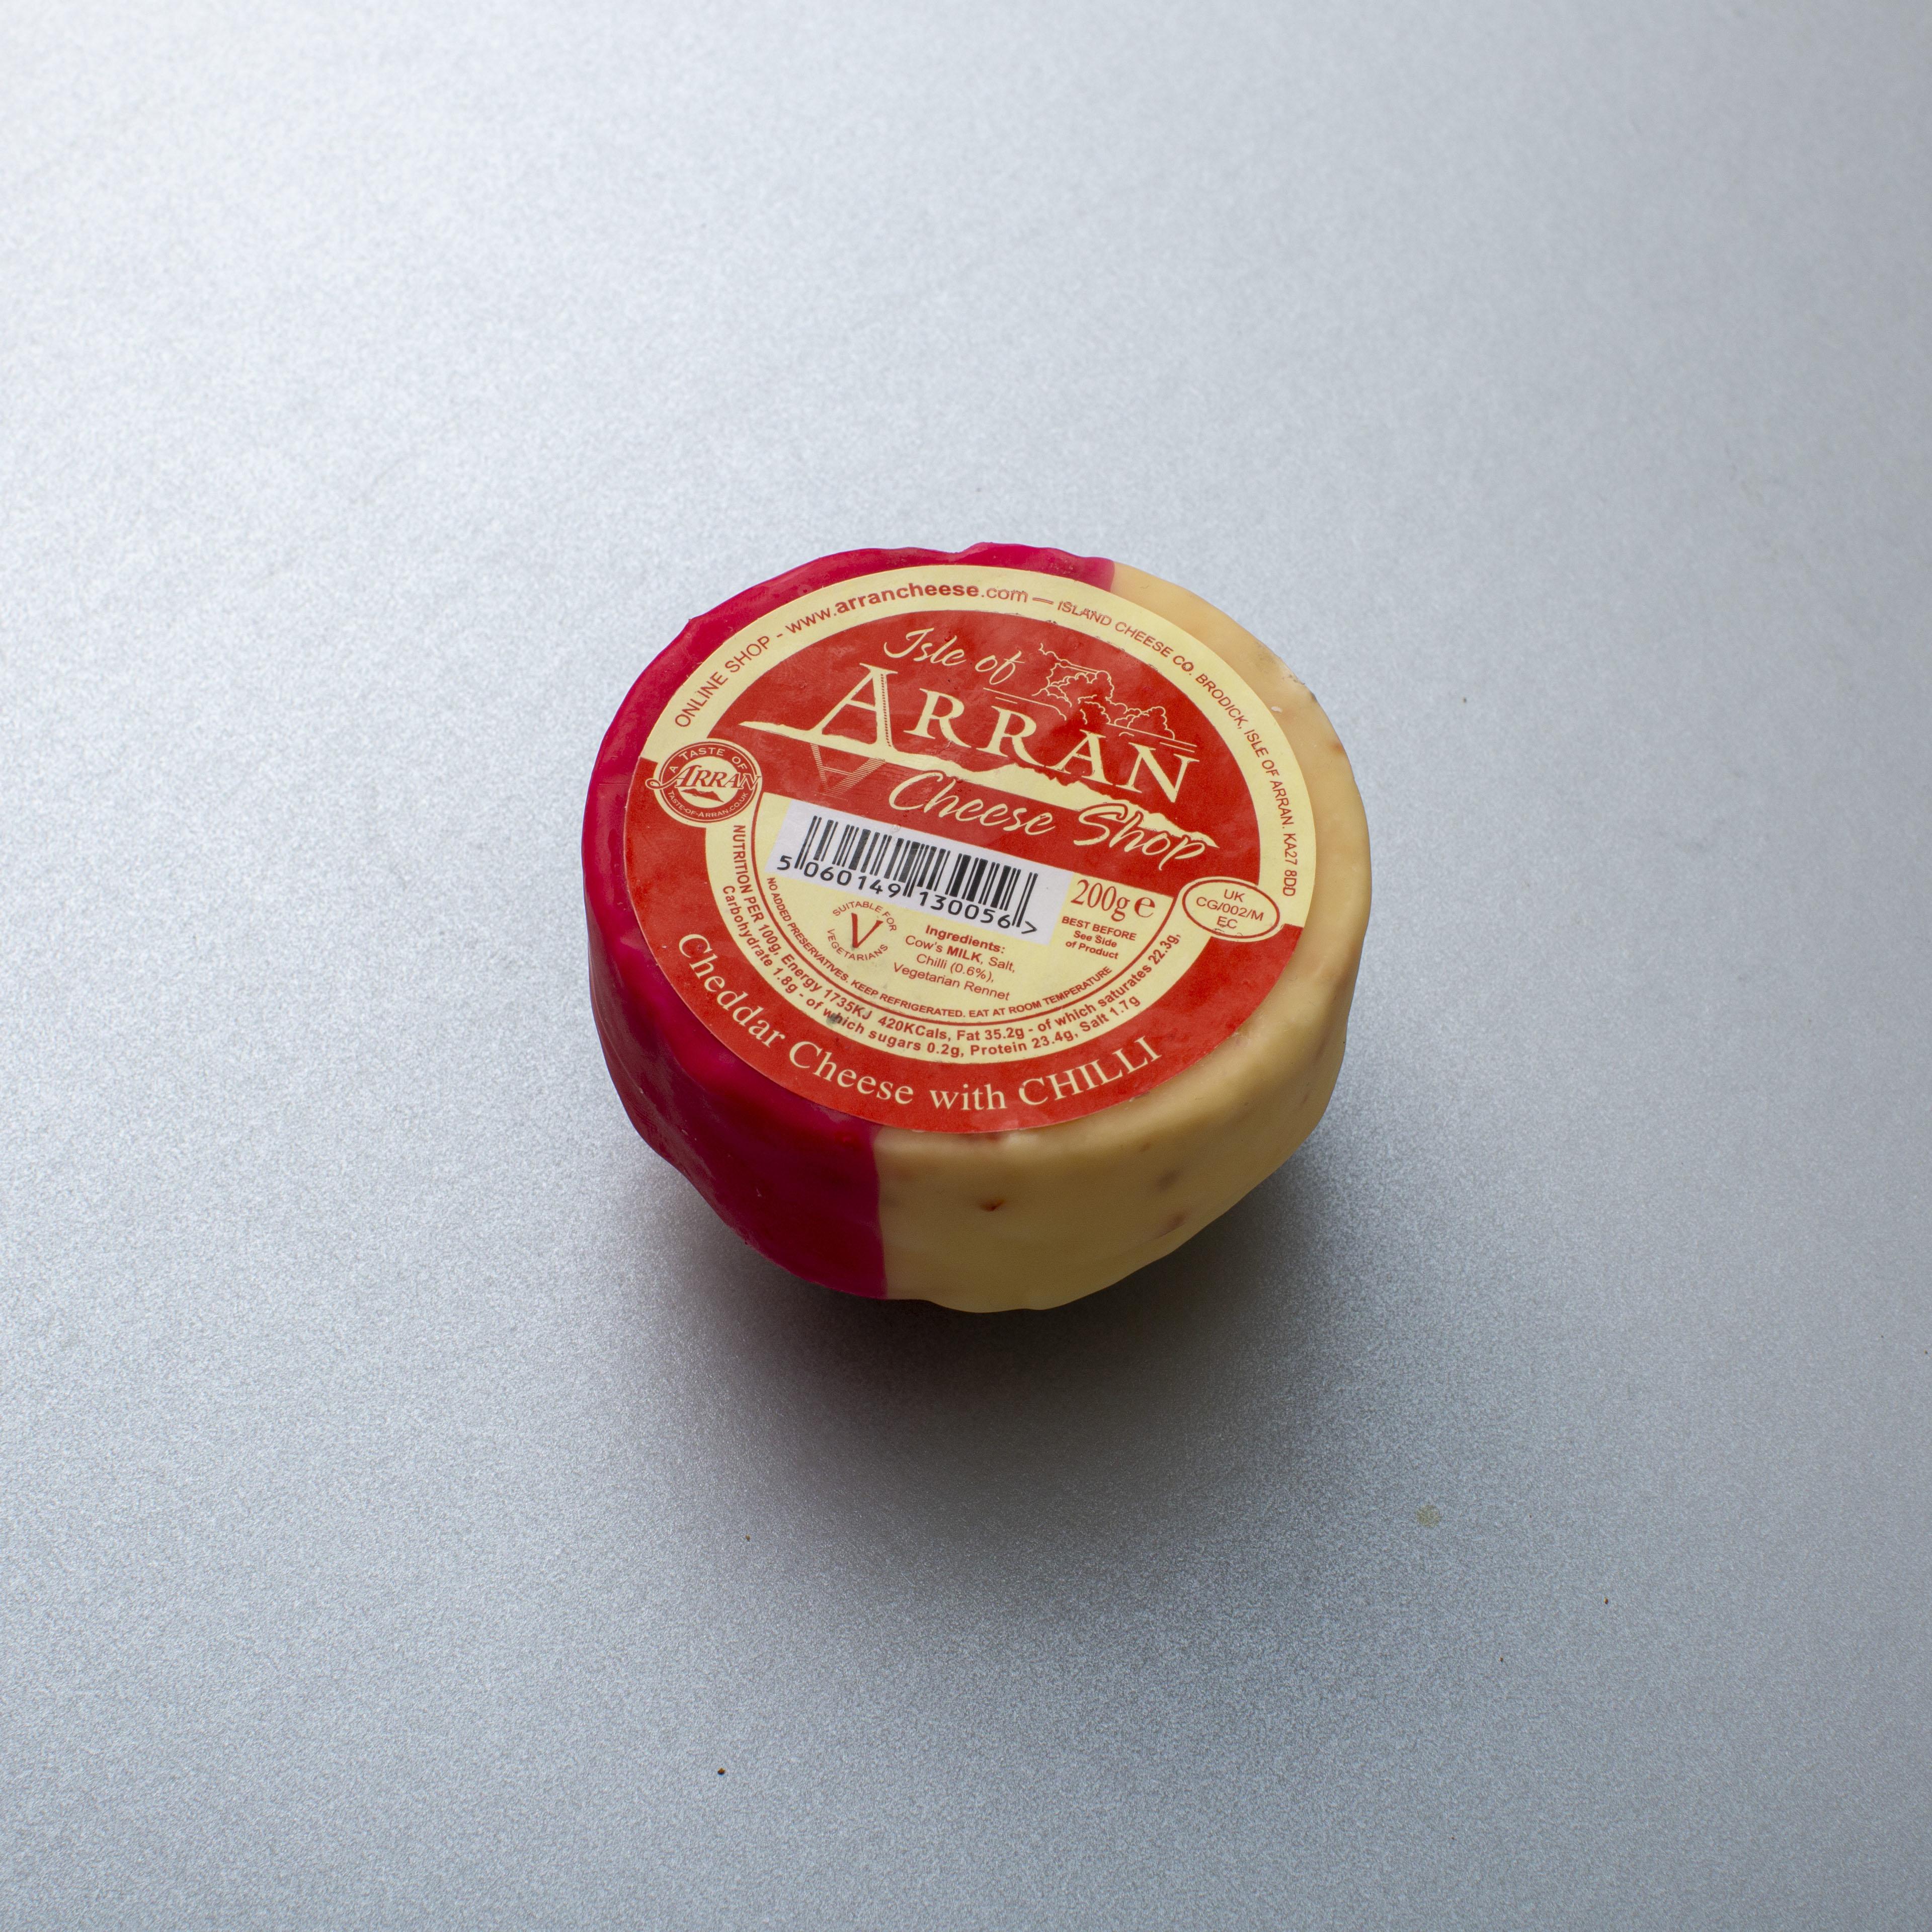 Isle of Arran Cheddar Cheese with Chilli